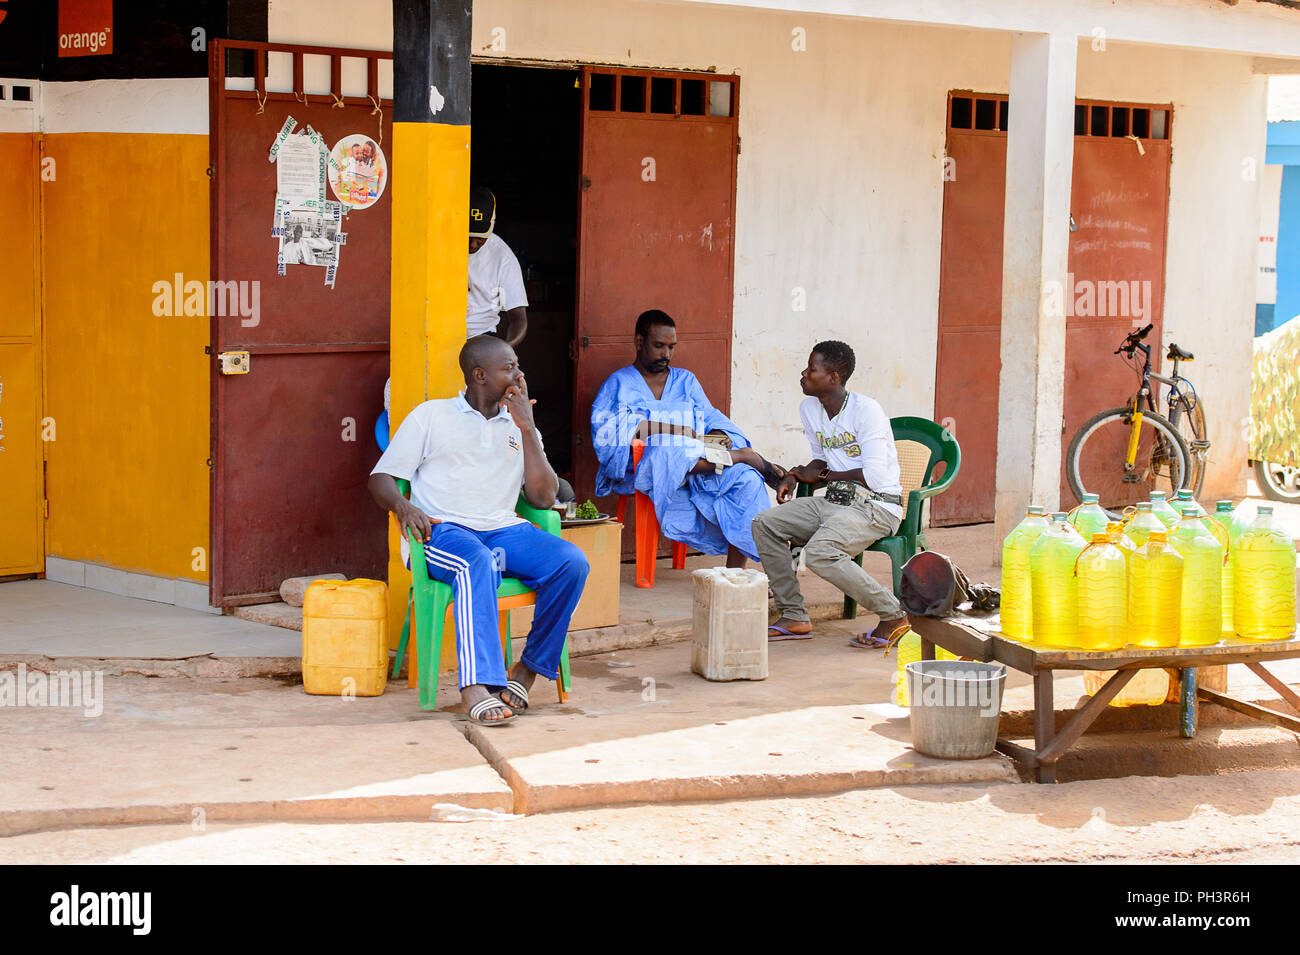 ROAD TO BISSAU, GUINEA B. - MAY 1, 2017: Unidentified local men talk about something in a village in Guinea Bissau. Still many people in the country l Stock Photo